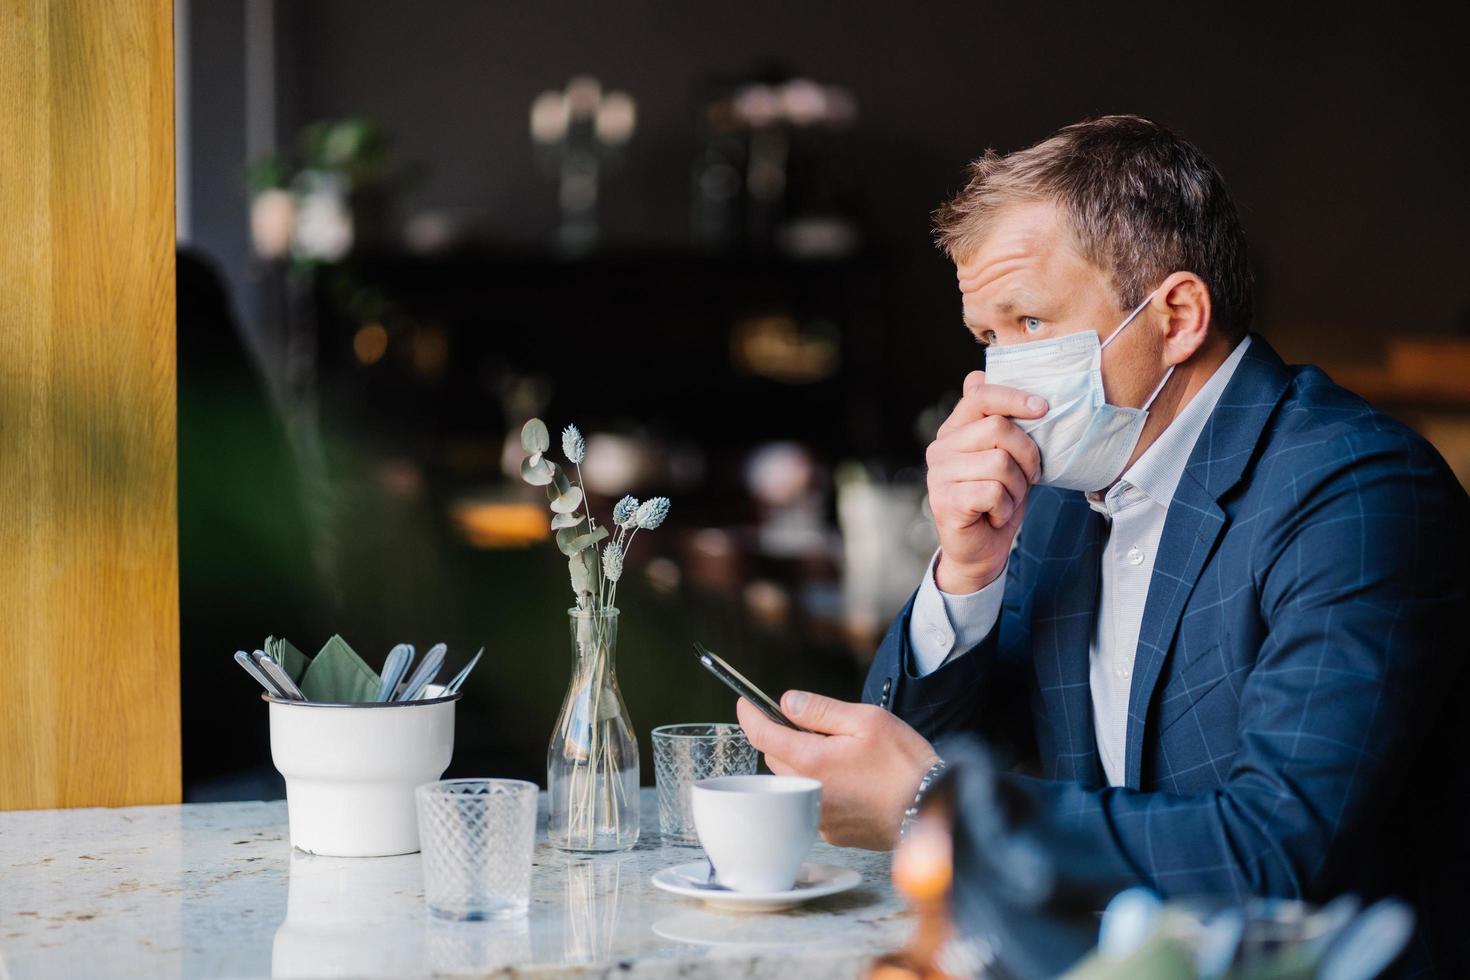 Elegant businessman coughs and wears protective medical mask during epidemic situation, sits in cozy cafeteria, waits for call, holds modern cell phone. Coronavirus pandemic, health care concept photo